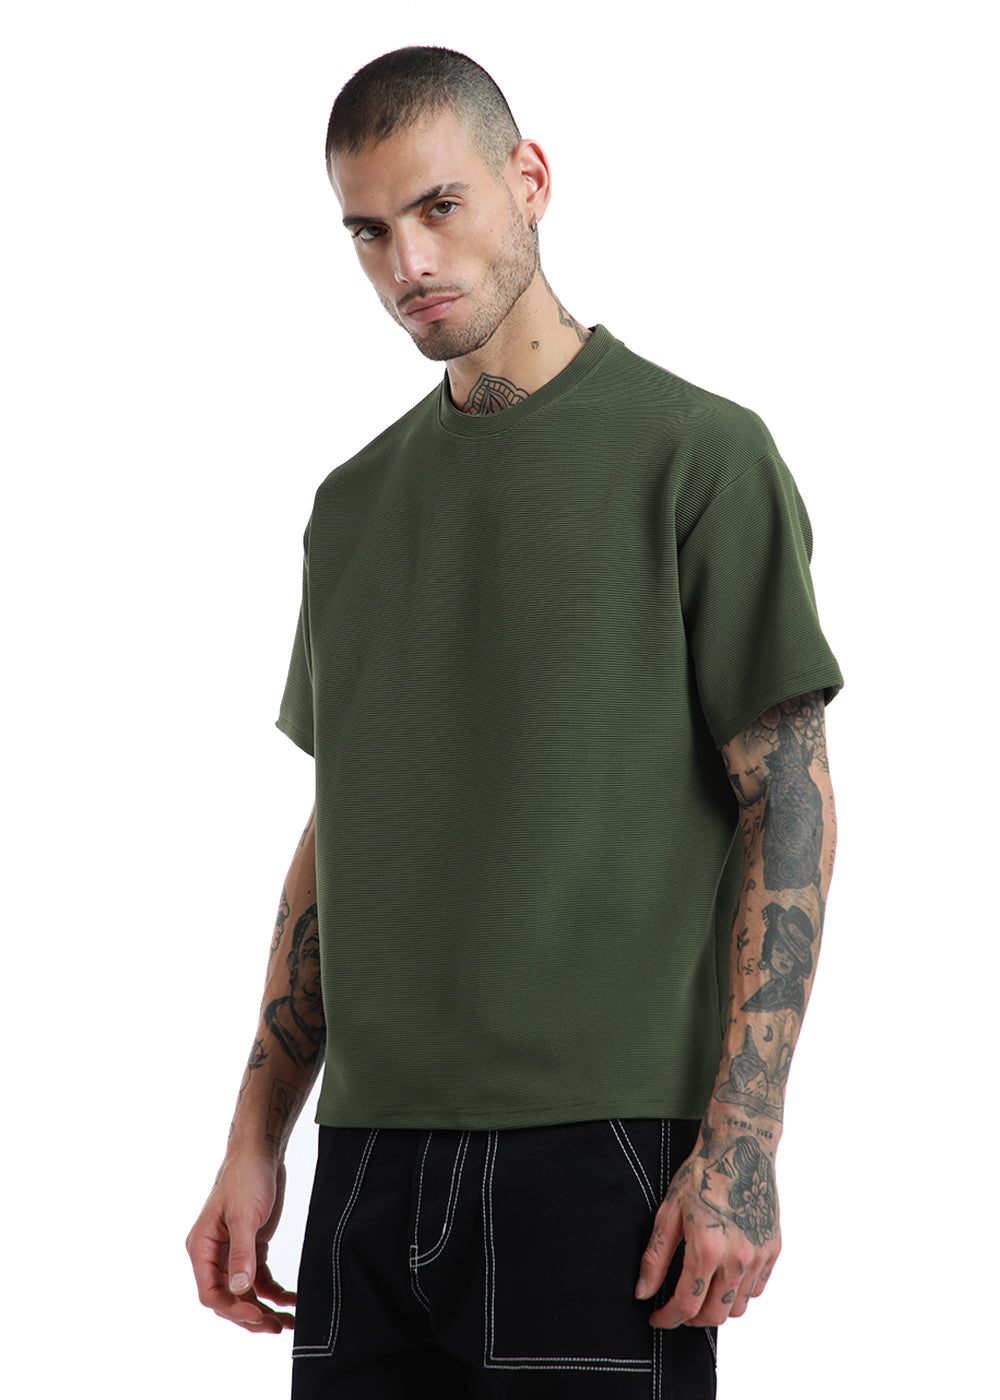 Oversized Olive Green Textured T-shirt